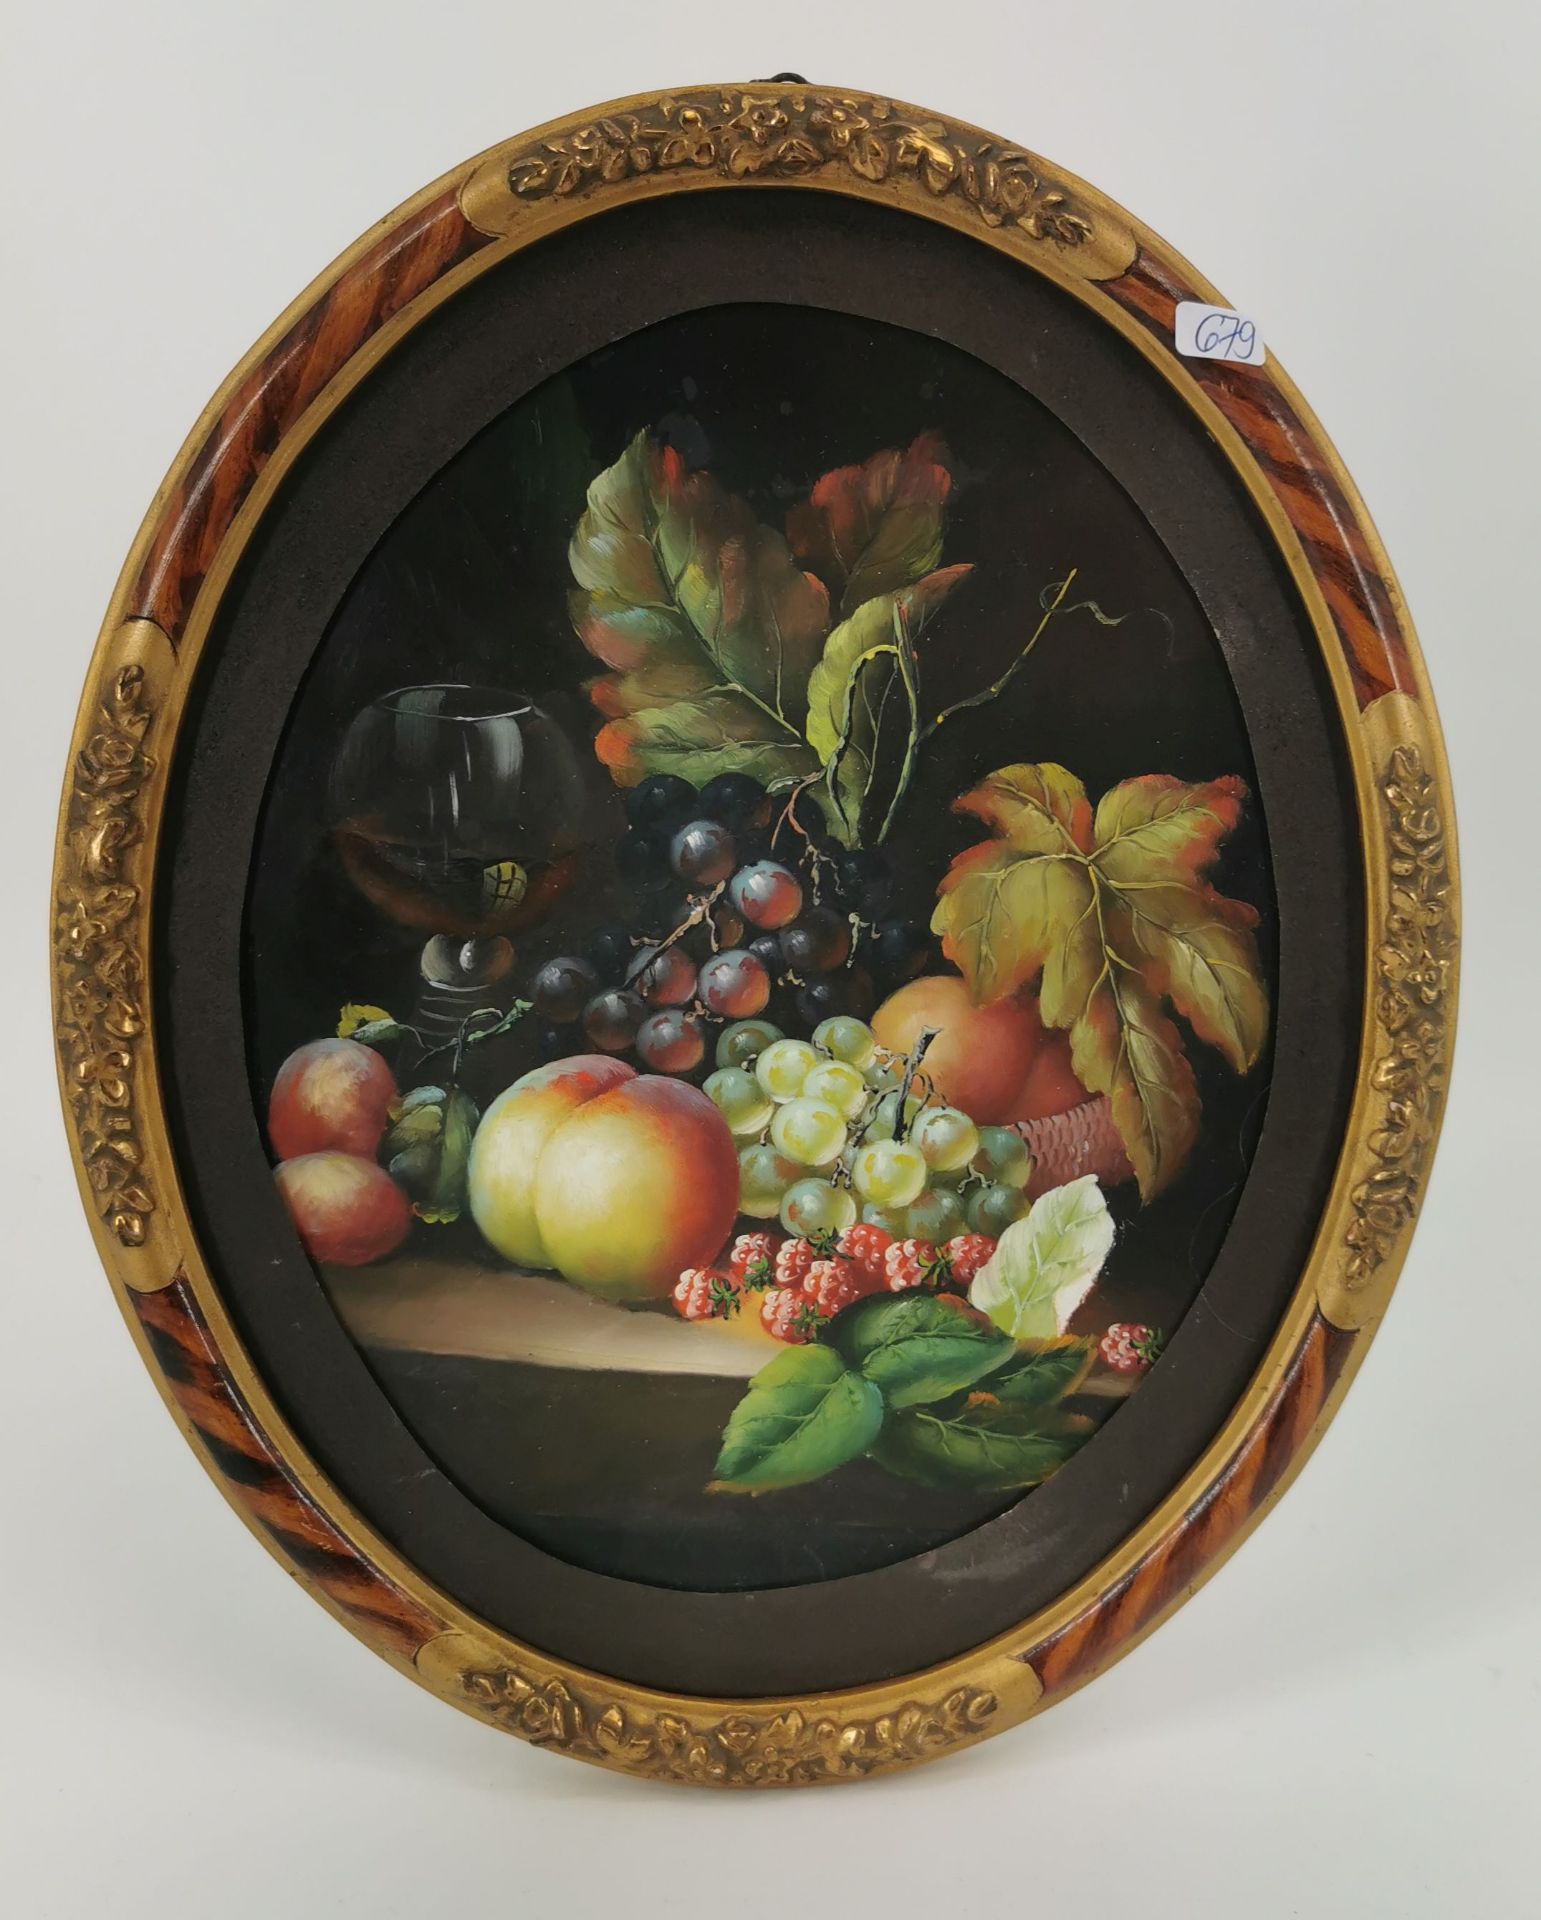 PAINTING: "STILL LIFE WITH FRUITS"